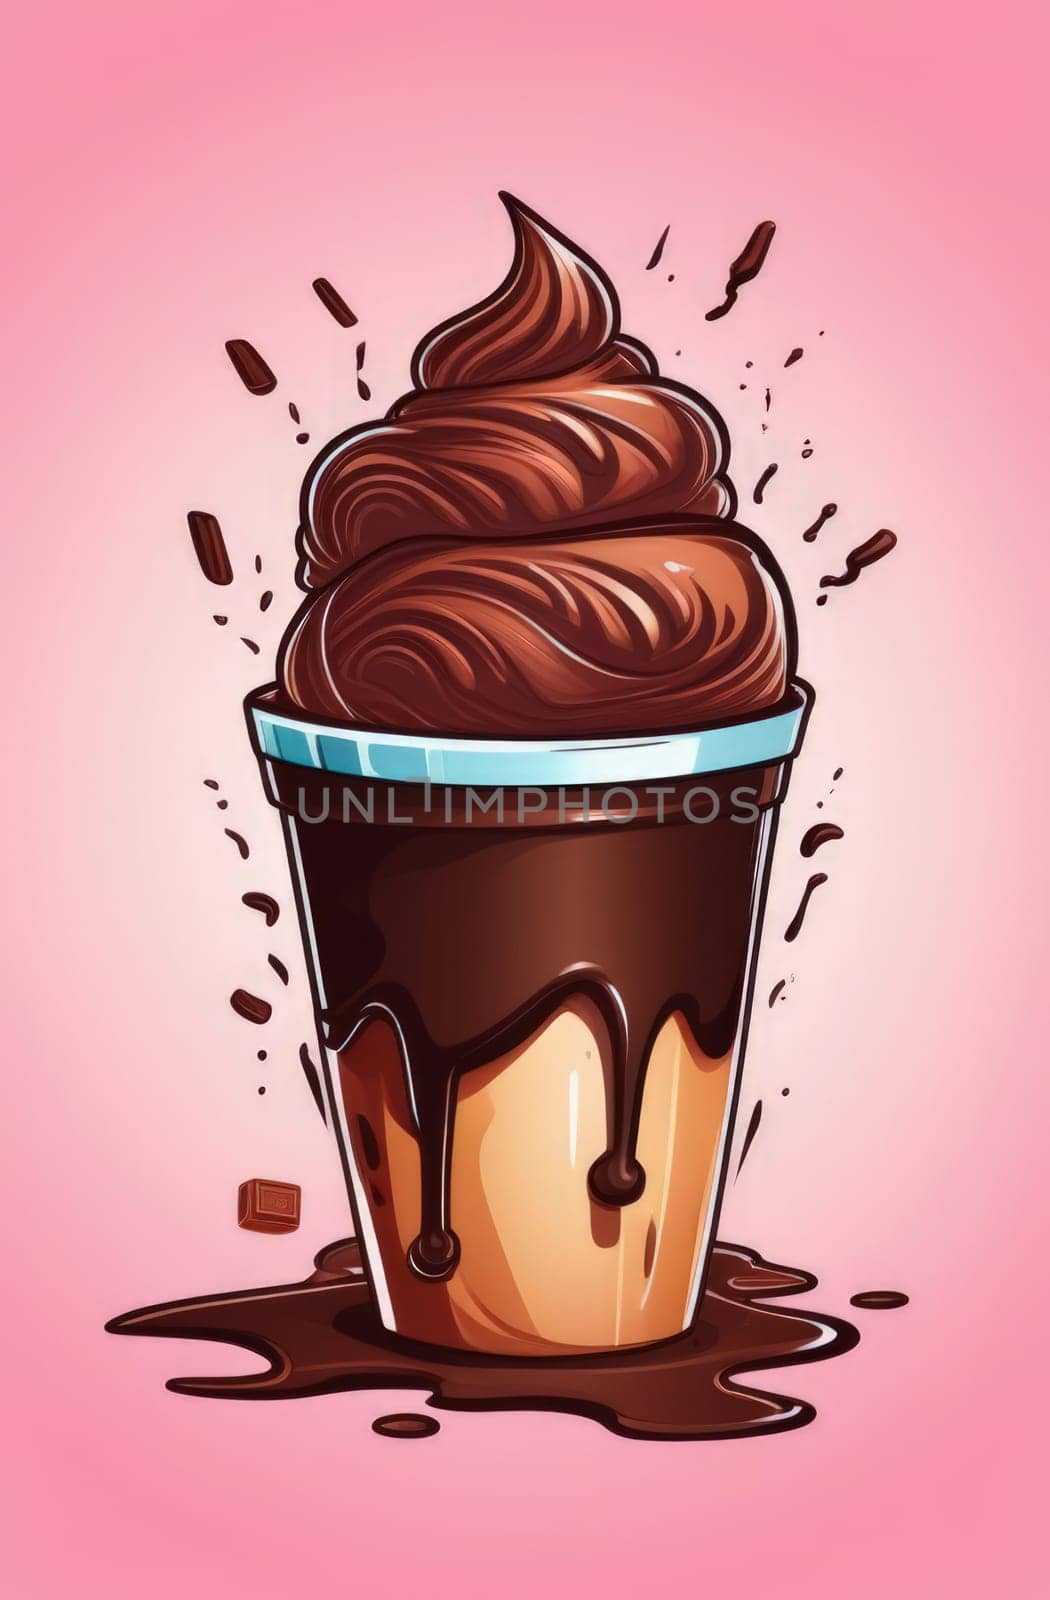 Delicious ice cream coffee dessert in cup, beautifully presented on vibrant pink background. For advertising, banner, relaxation, lifestyle, menu, dessert, culinary, cafe themed content. Copy space